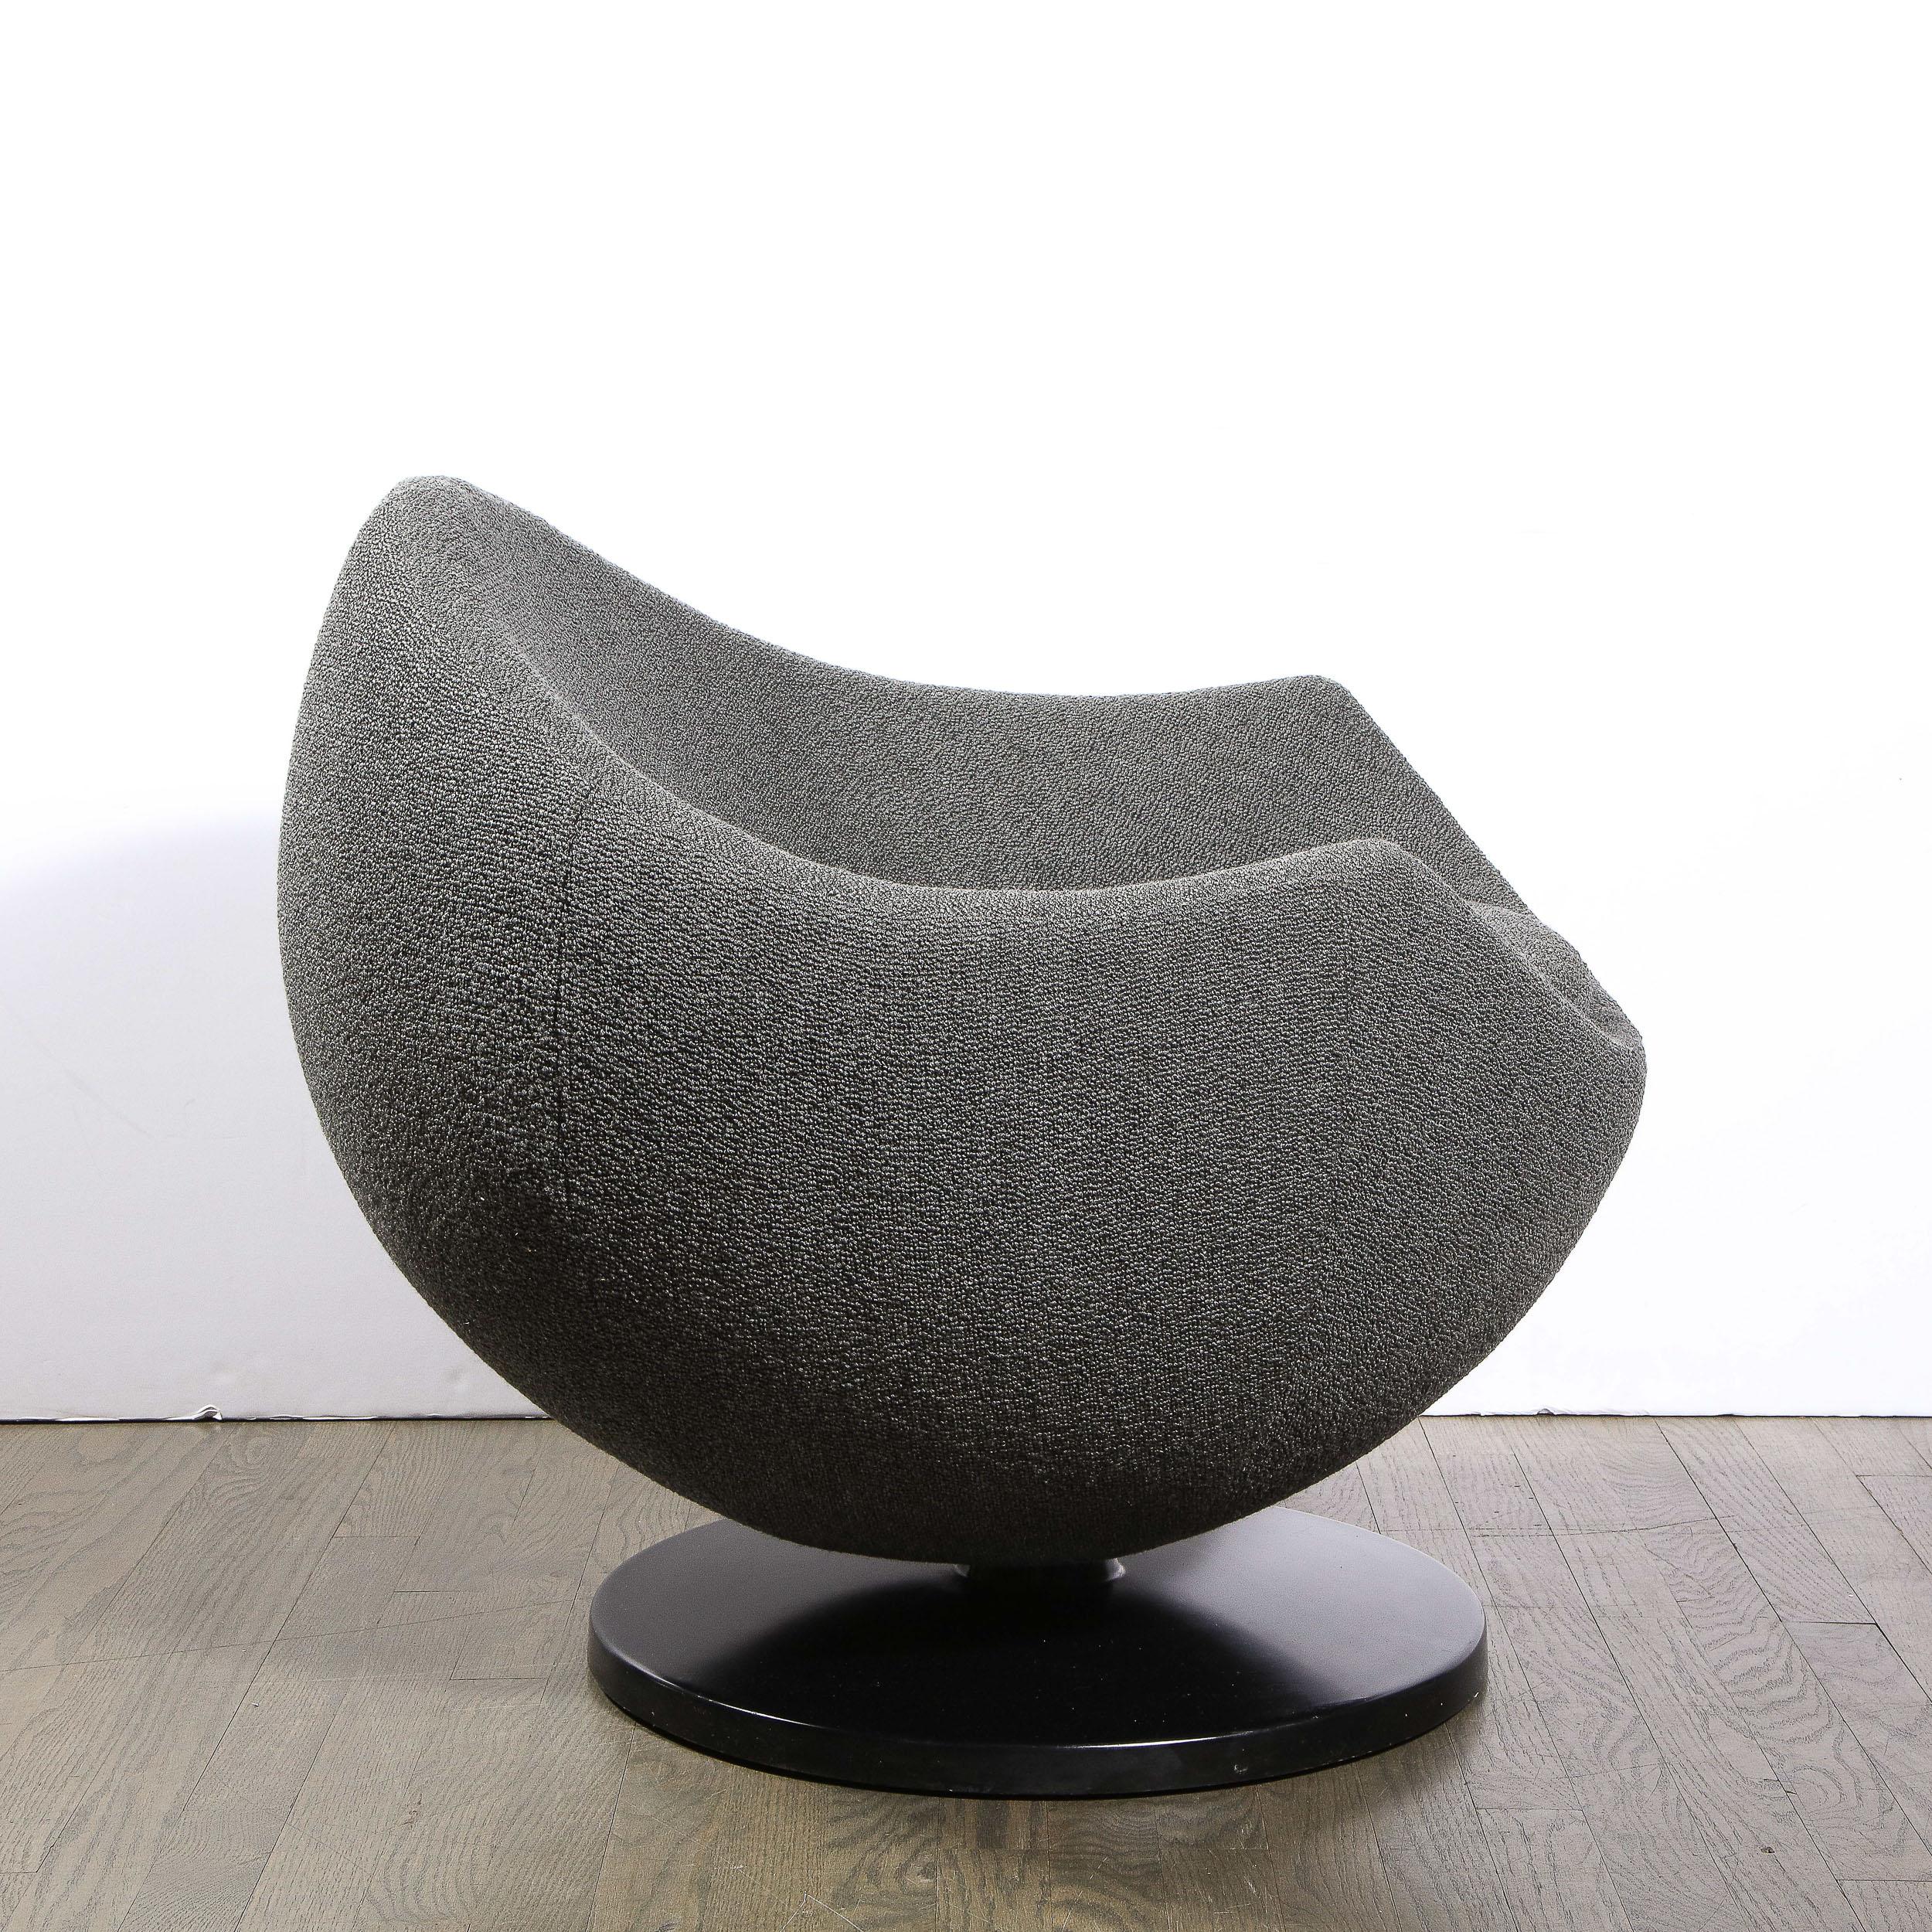 American Mid-Century Space Age Modern Egg Form Chair in Holly Hunt Fabric